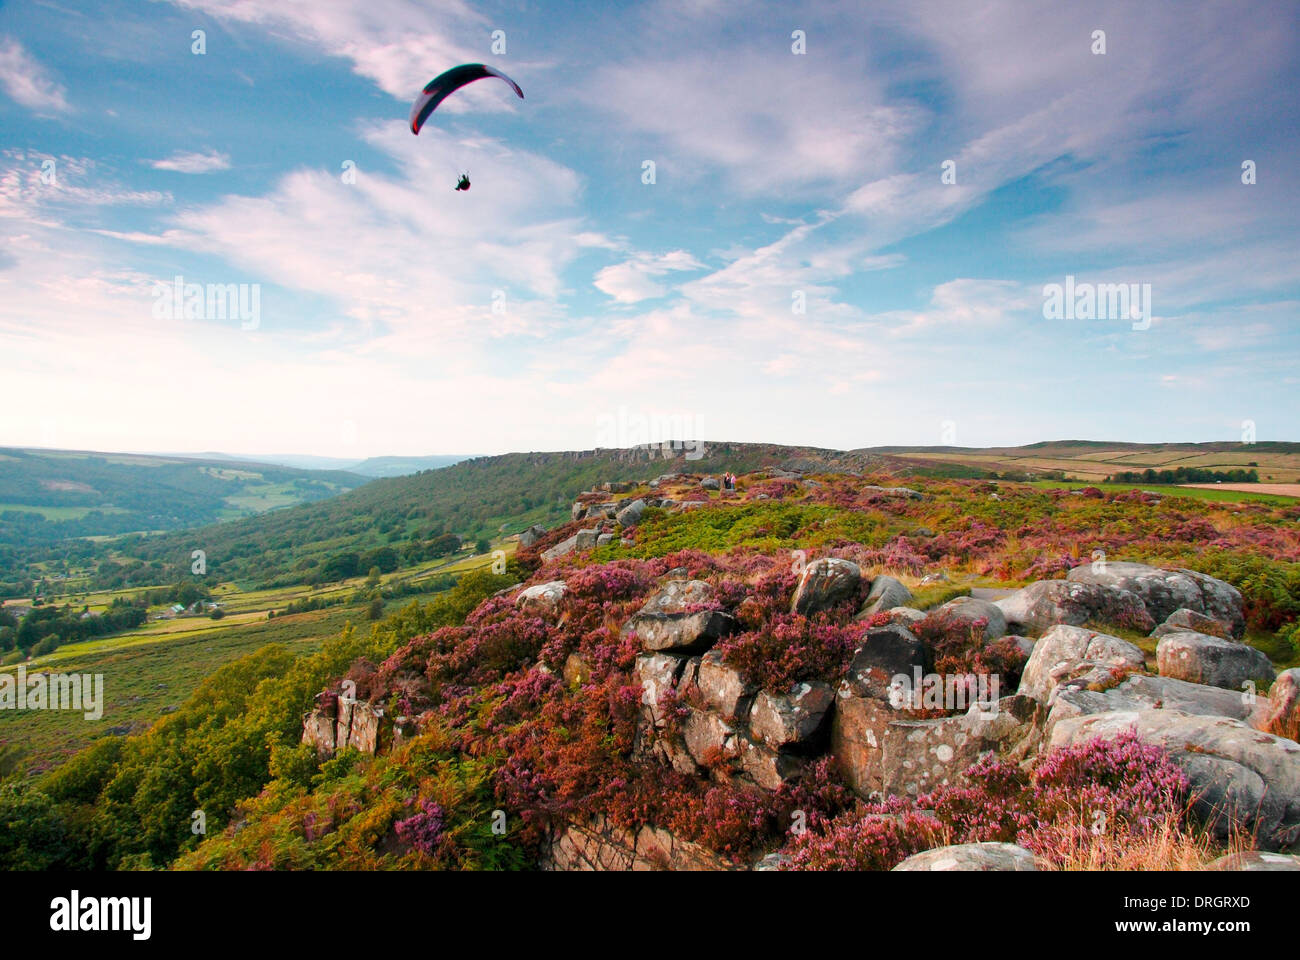 Paraglider over a heather-clad Curbar Edge, in the Dark Peak area of the Peak District National Park, Derbyshire, UK Stock Photo